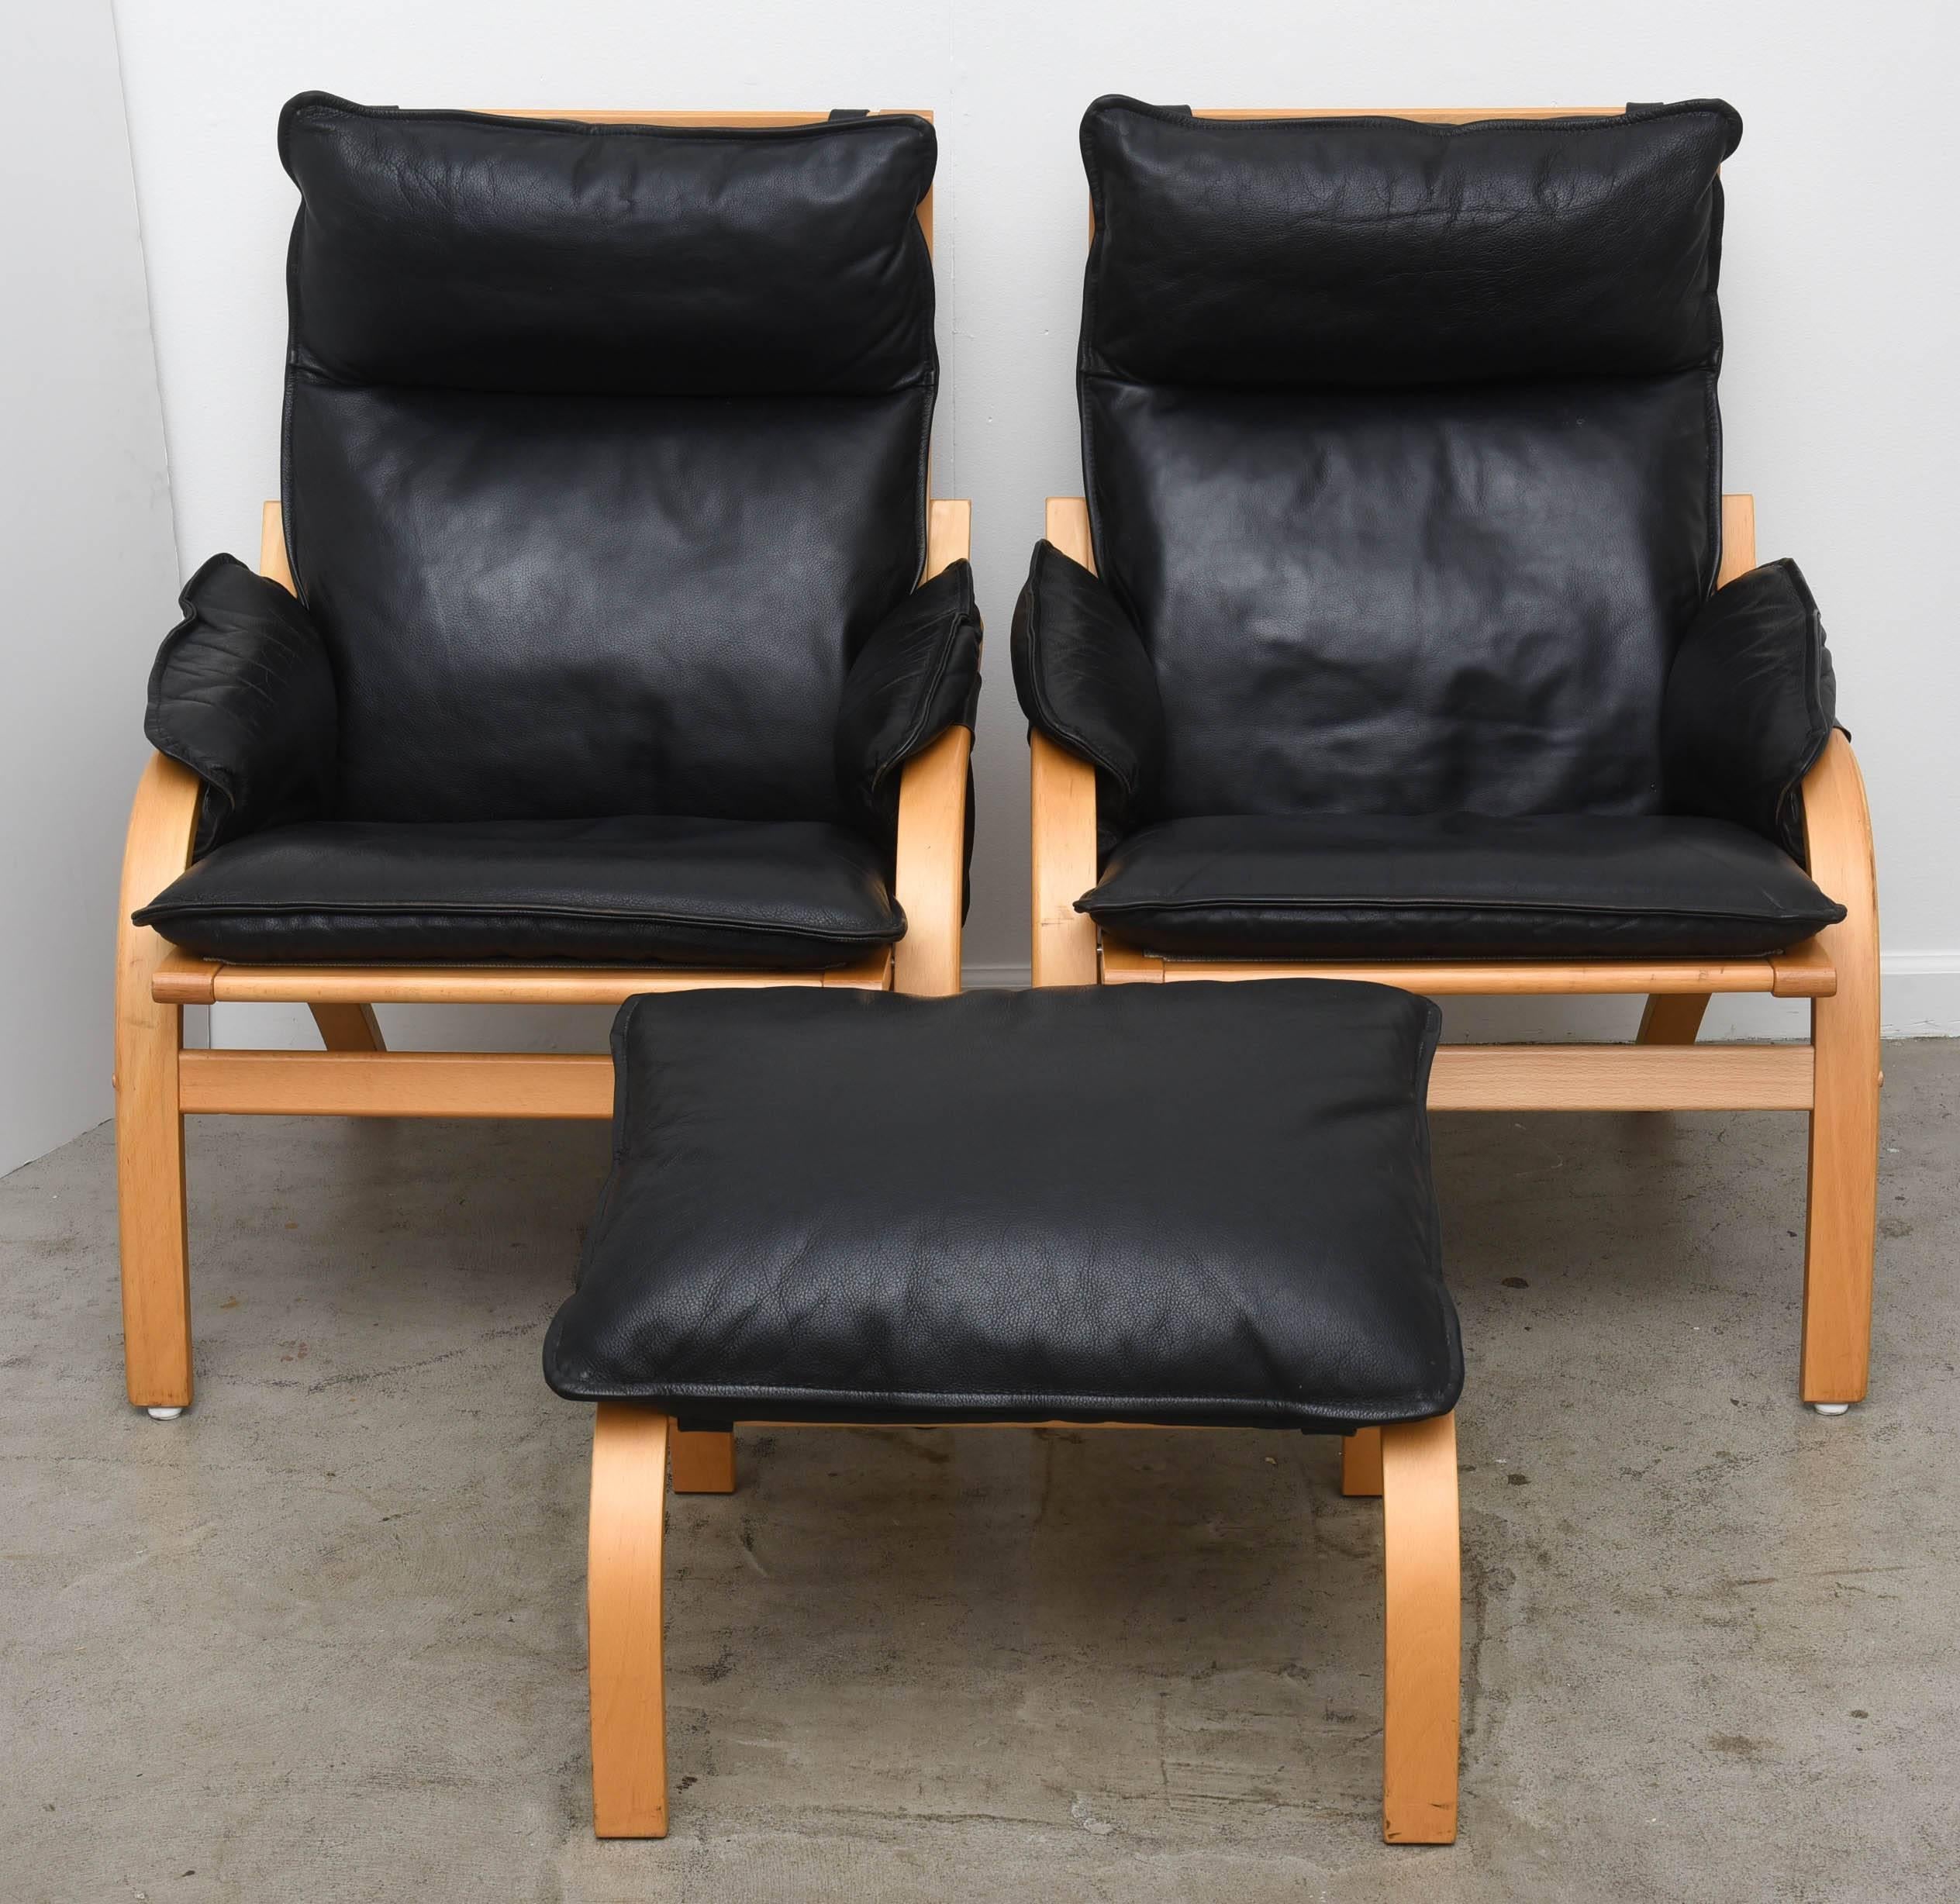 Pair of Mogens Hansen designed Beechwood Framed Lounge Chairs and ottoman with original black leather. Circa 1980's.'